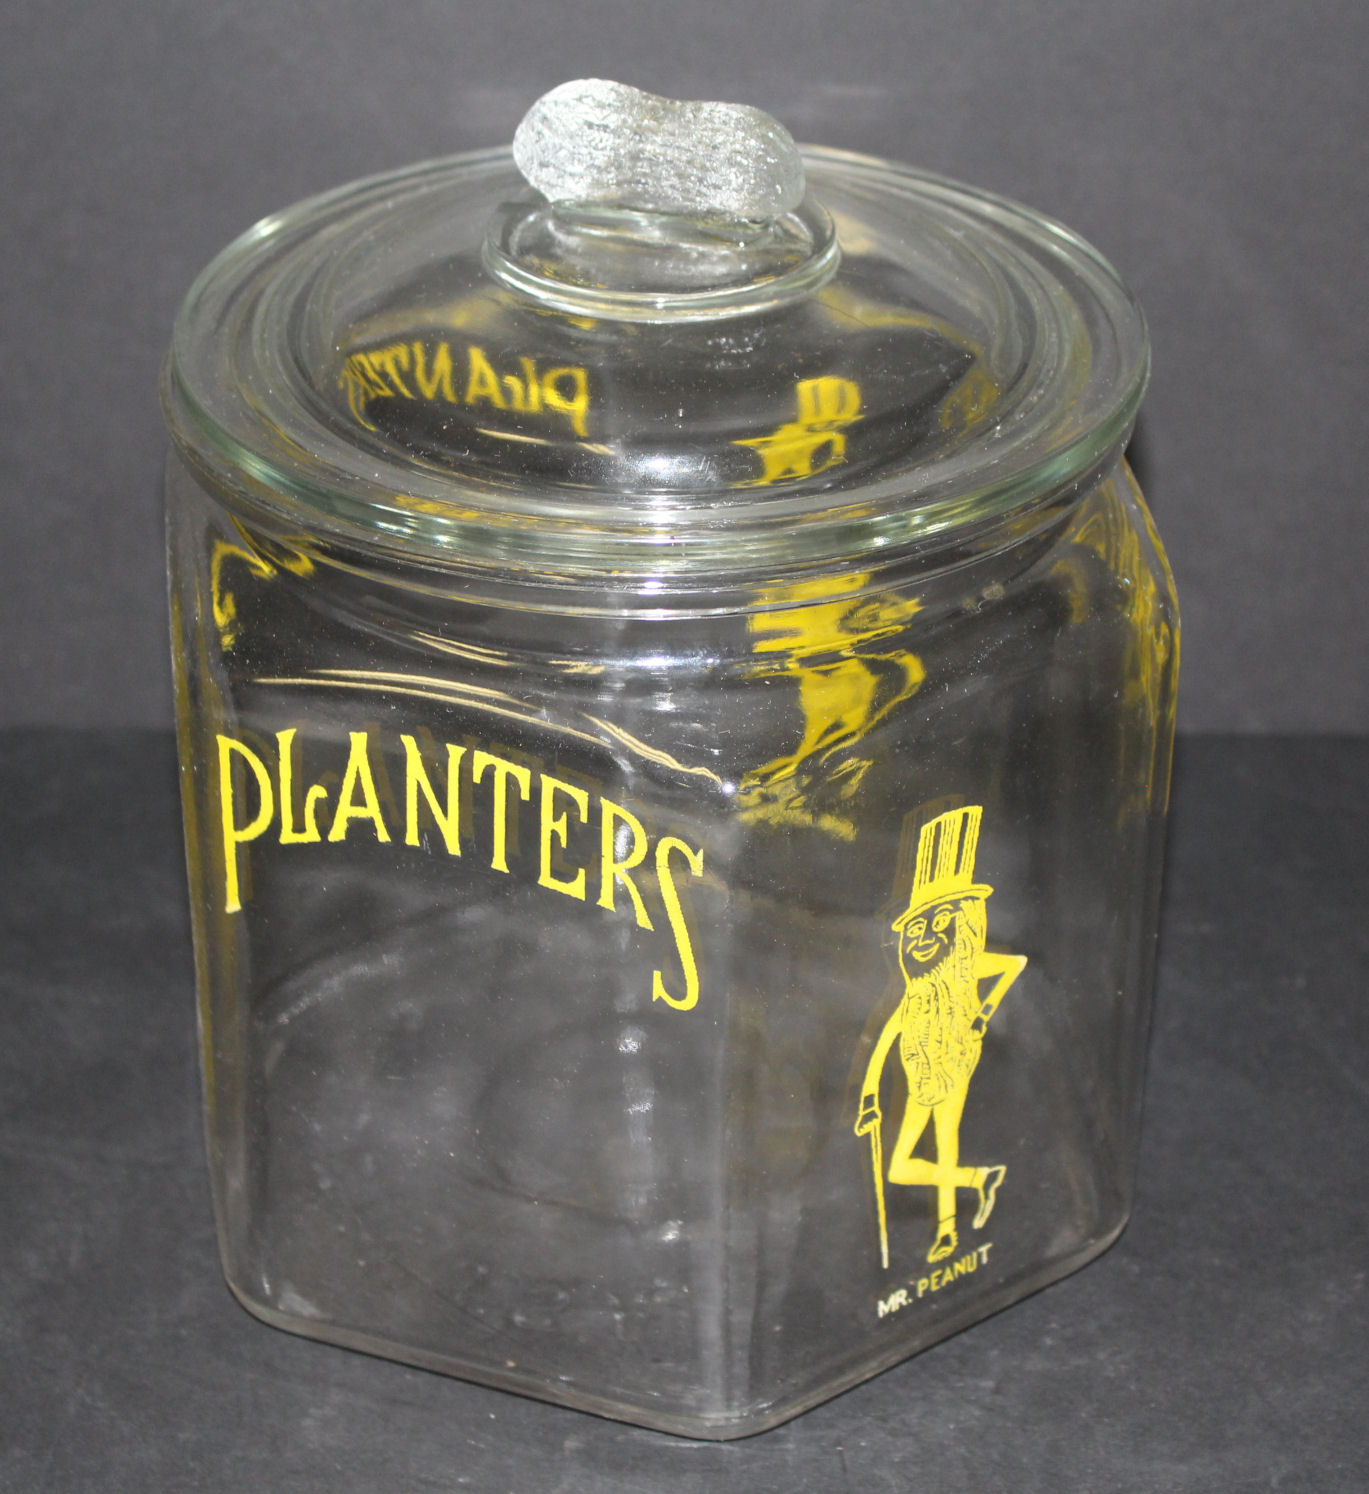 Bargain John's Antiques | Planters Peanuts Advertising Country Store Glass Hexagon ...1369 x 1494